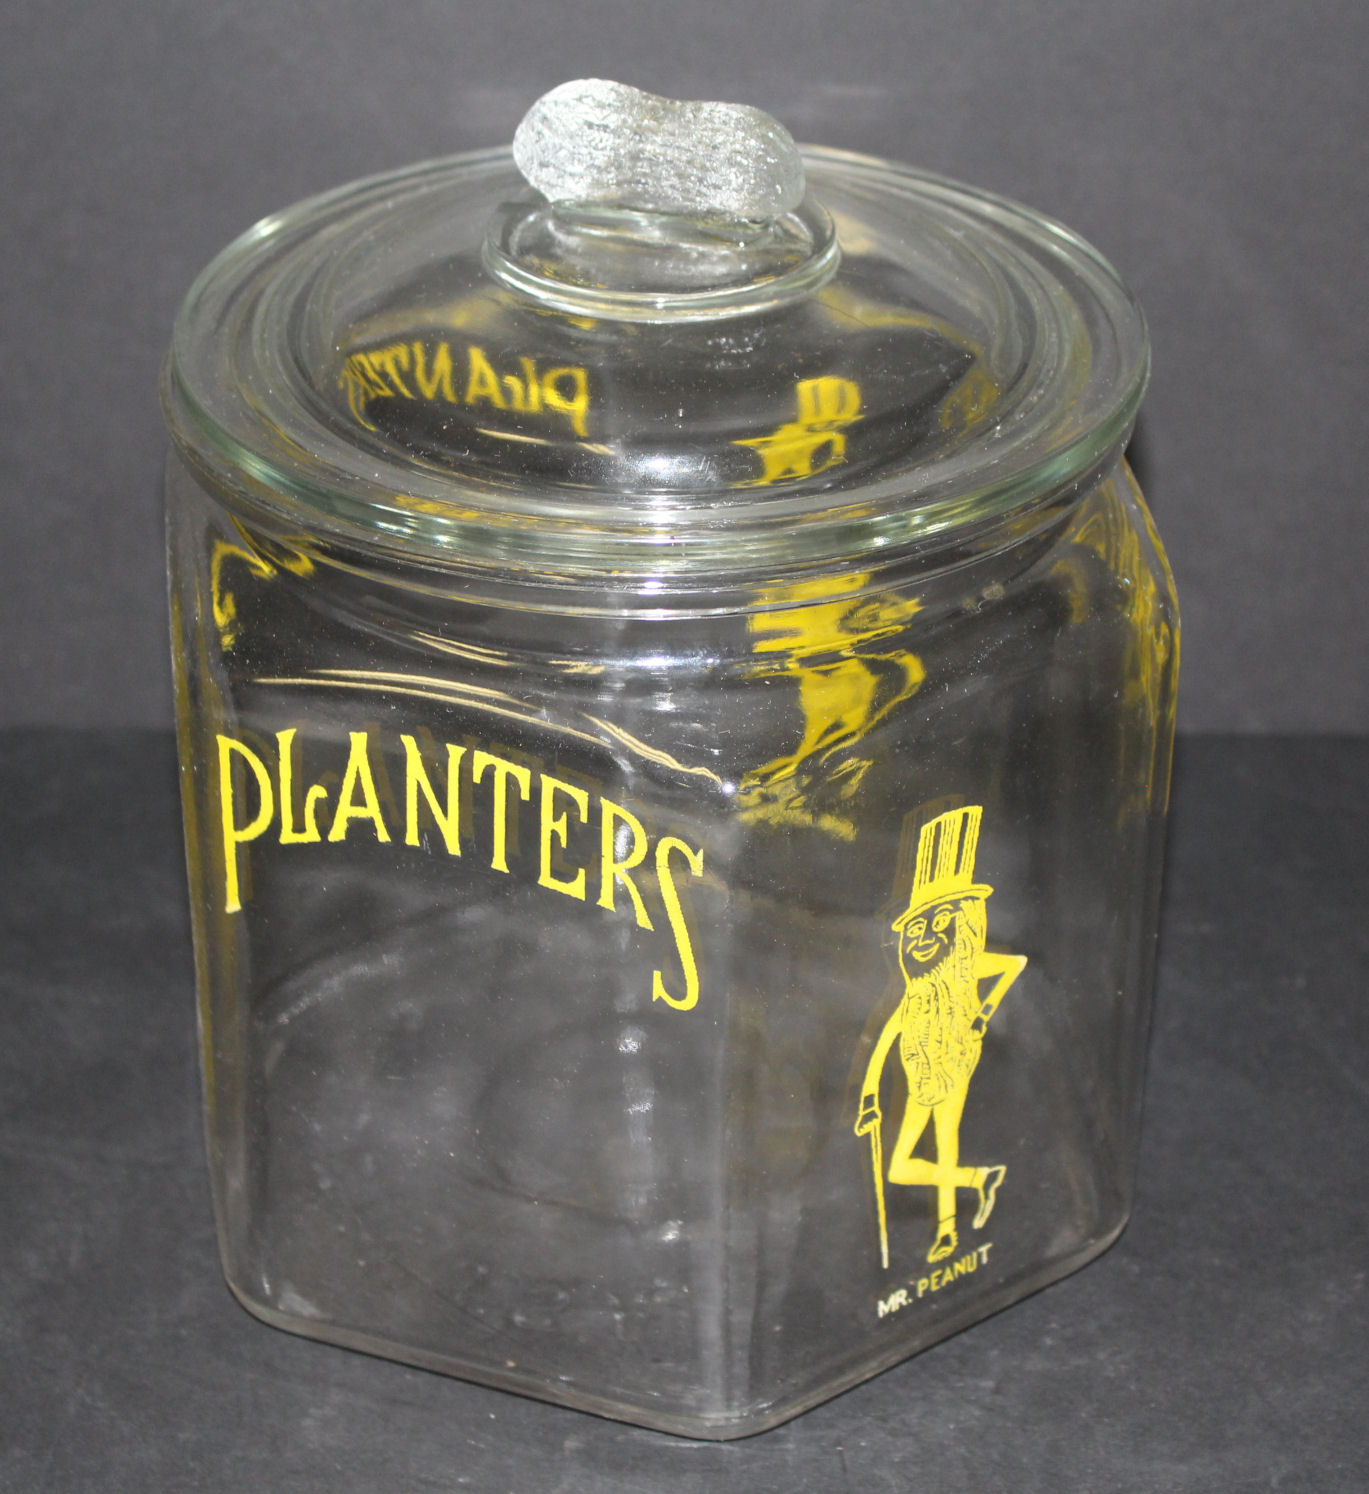 Bargain John's Antiques | Planters Peanuts Advertising Country Store Glass Hexagon ...1369 x 1494